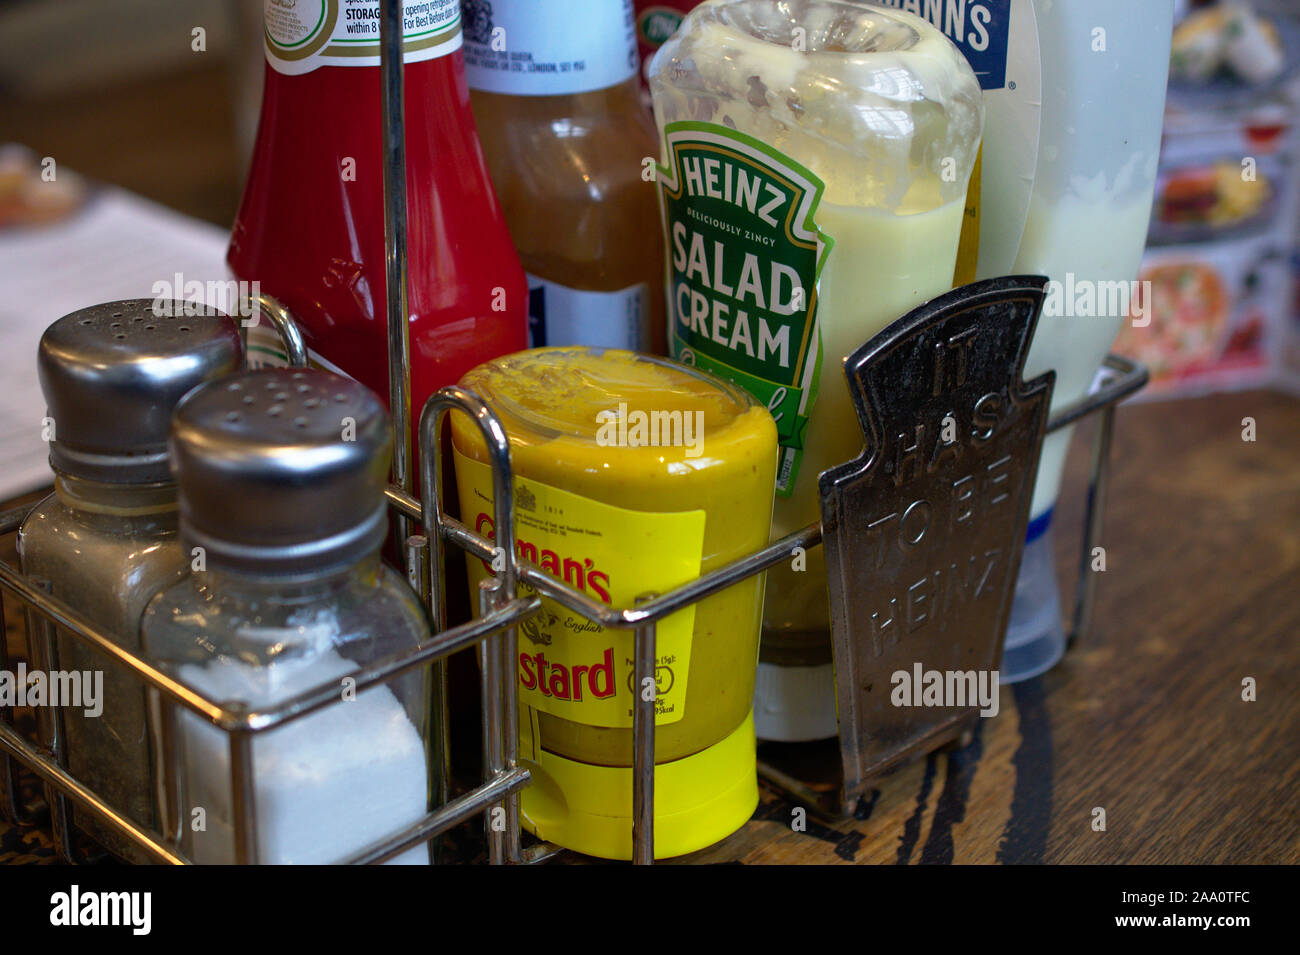 Aberystwyth Ceredigion/UK November 11 2019: Food condiments in a carry cage on a table in a wetherspoons pub Stock Photo